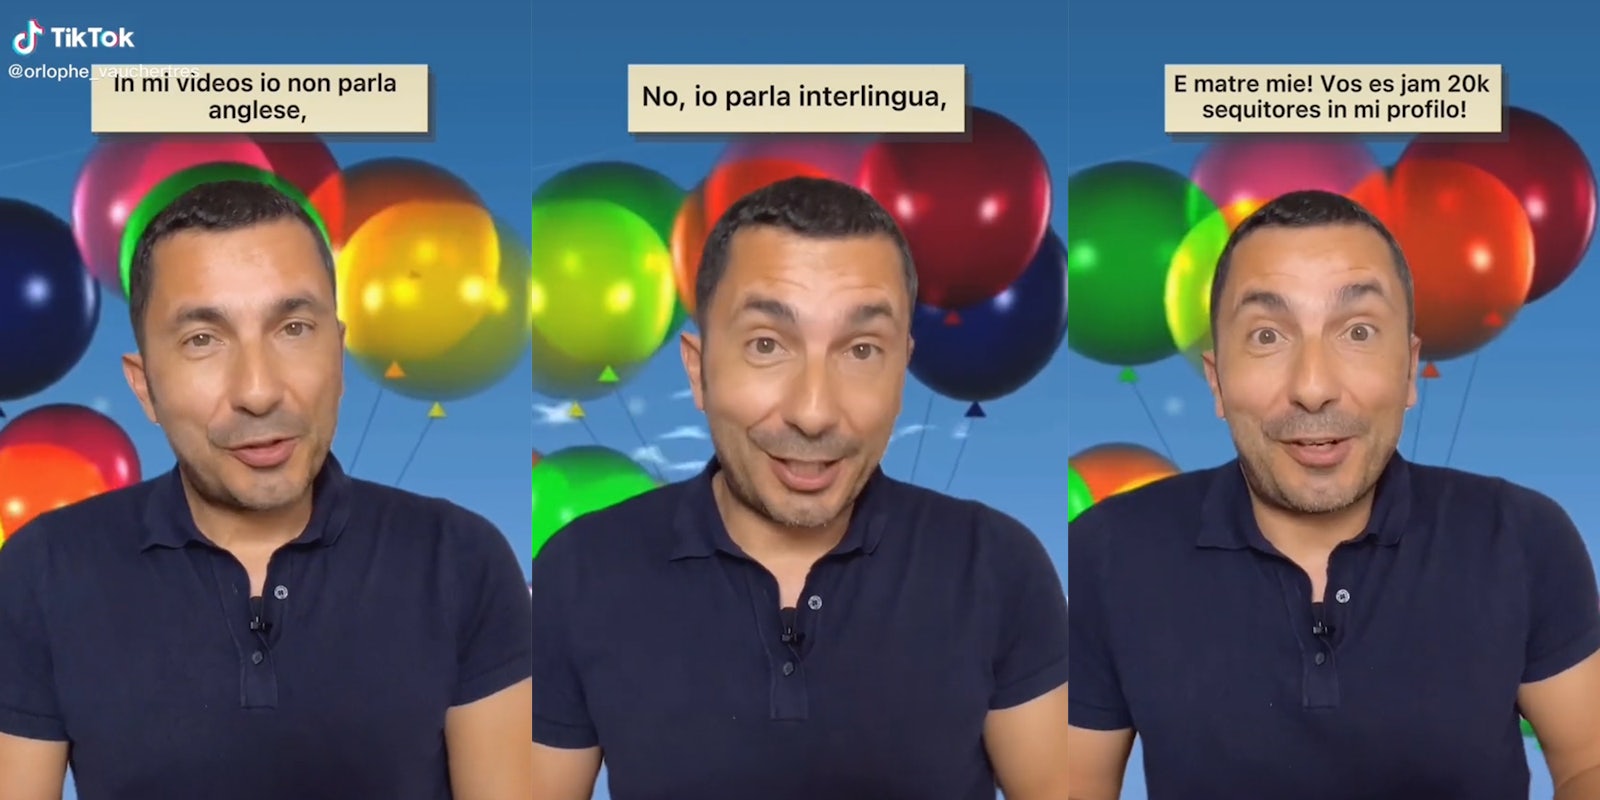 man in front of balloons speaking 'interlingua'